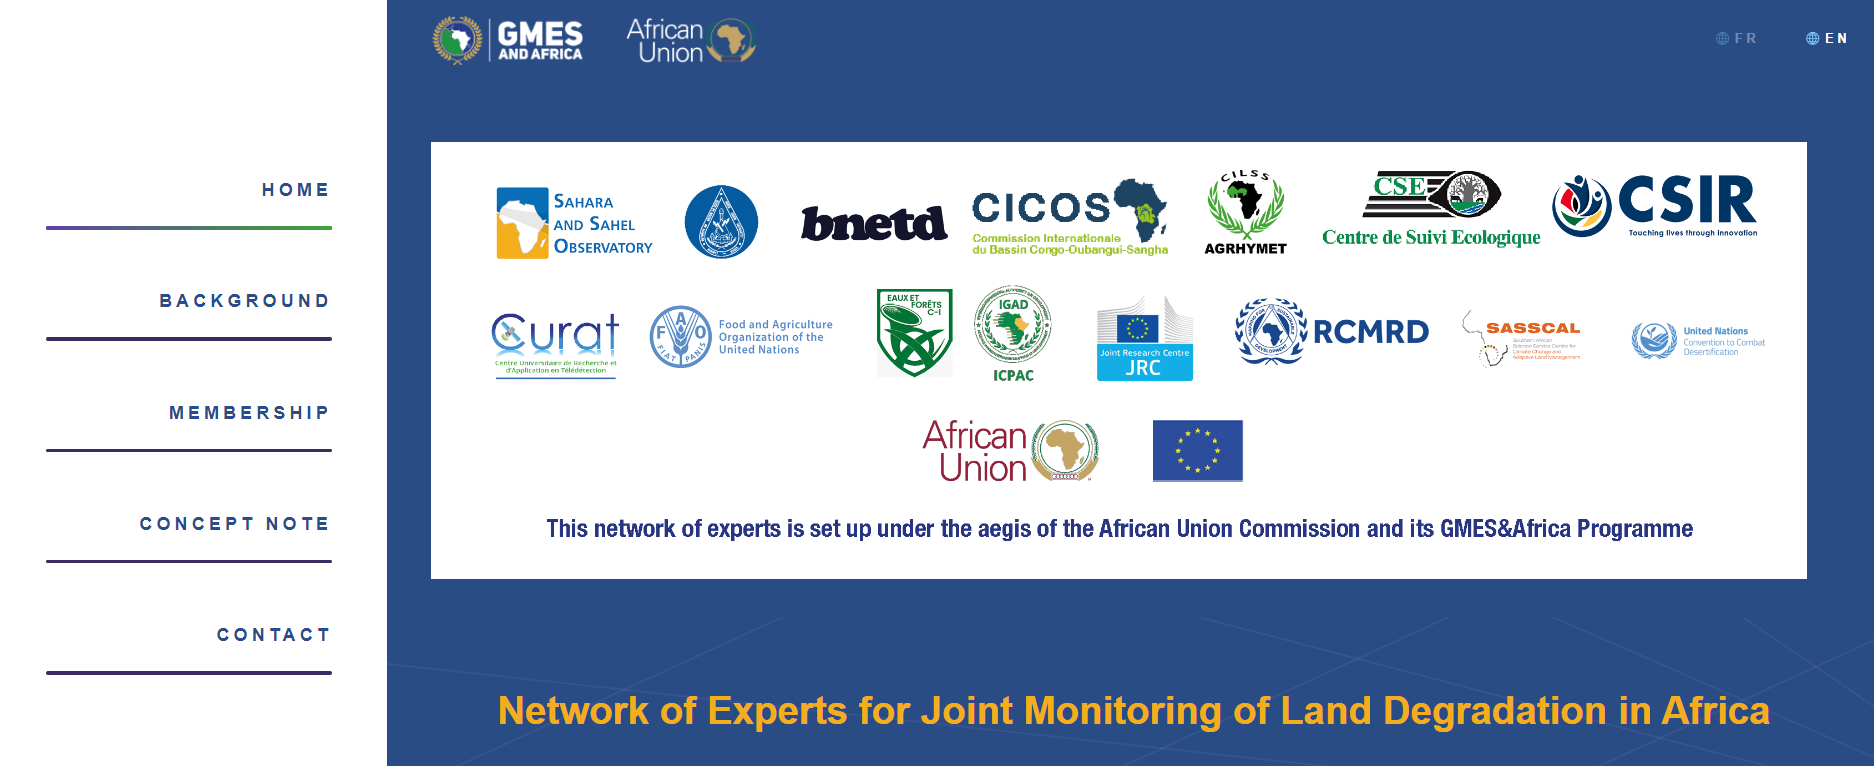  Network of experts for monitoring land degradation in Africa.